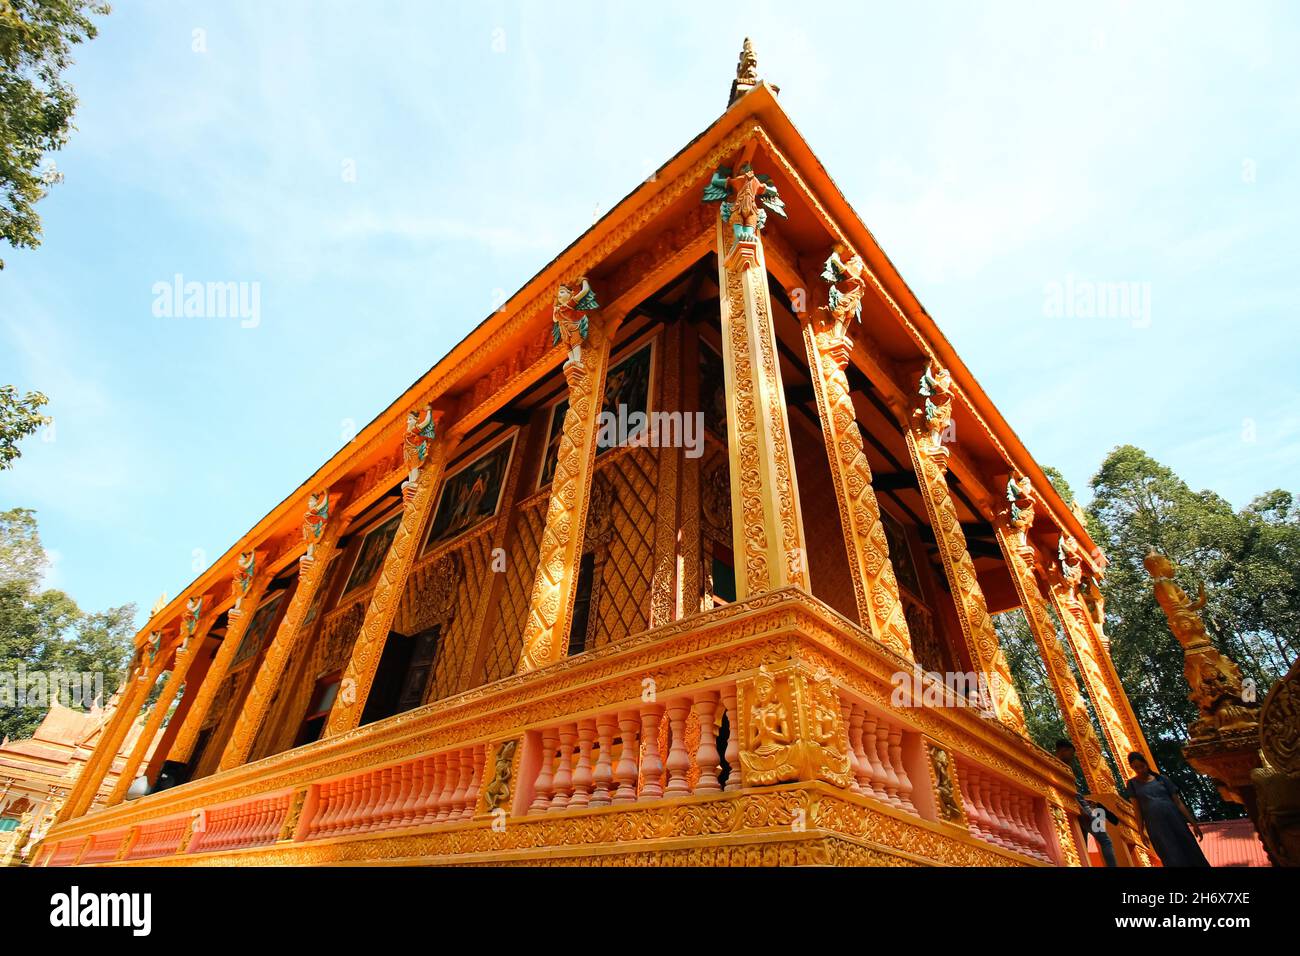 Low angle view of Chua Phu Ly, a Khmer or Cambodian Buddhist temple in Can tho, Vietnam Stock Photo